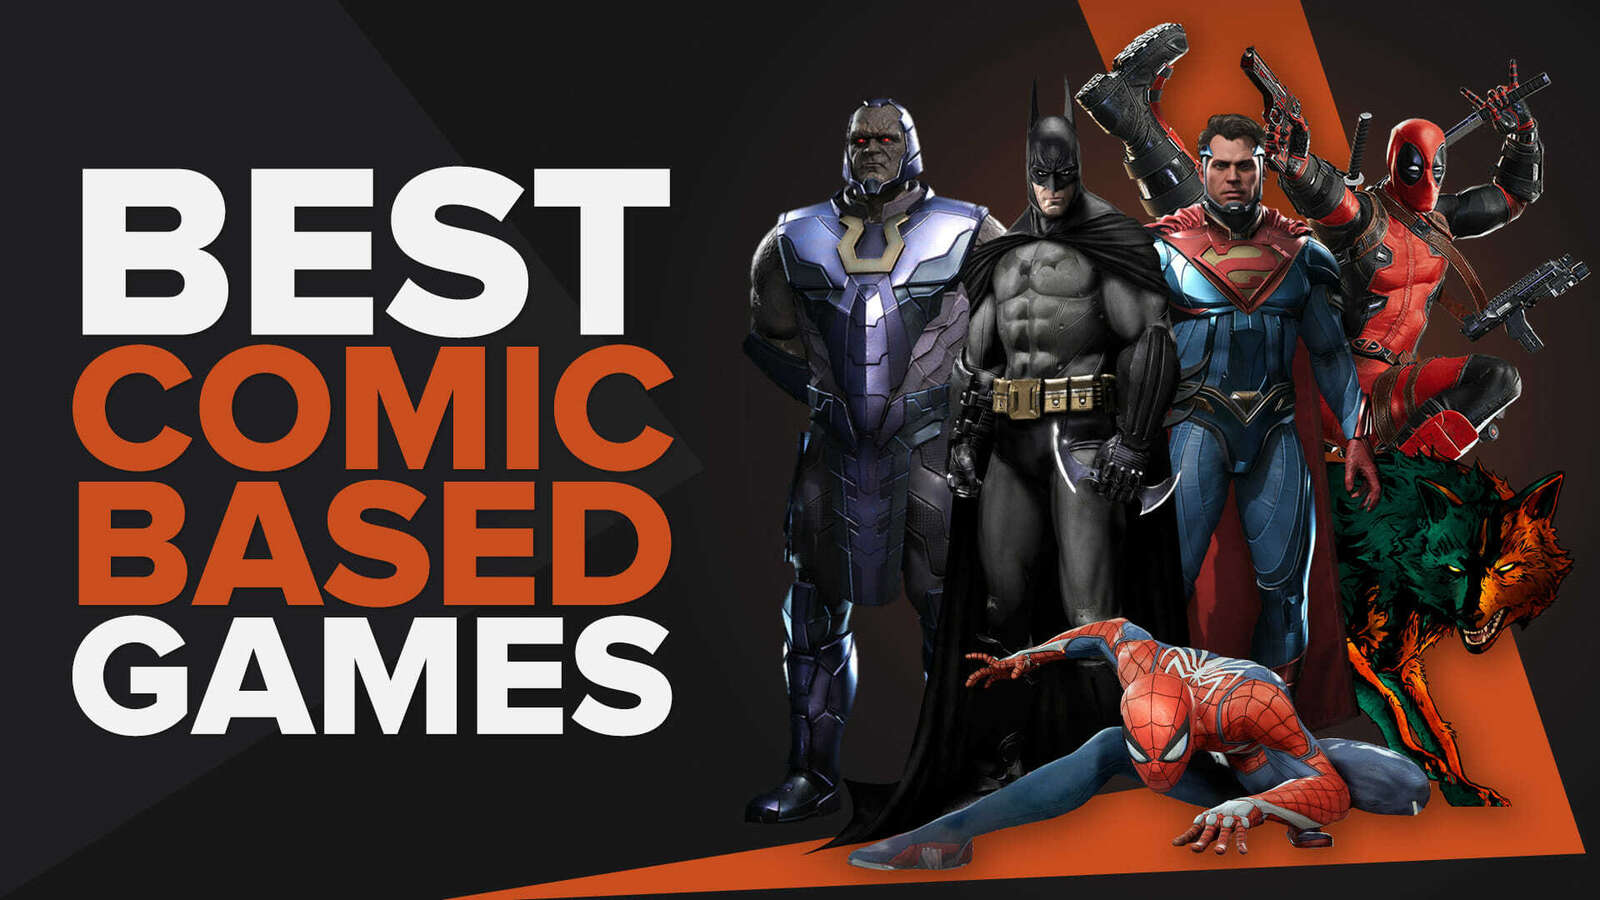 The Top 10 Best Video Games Based On Comics